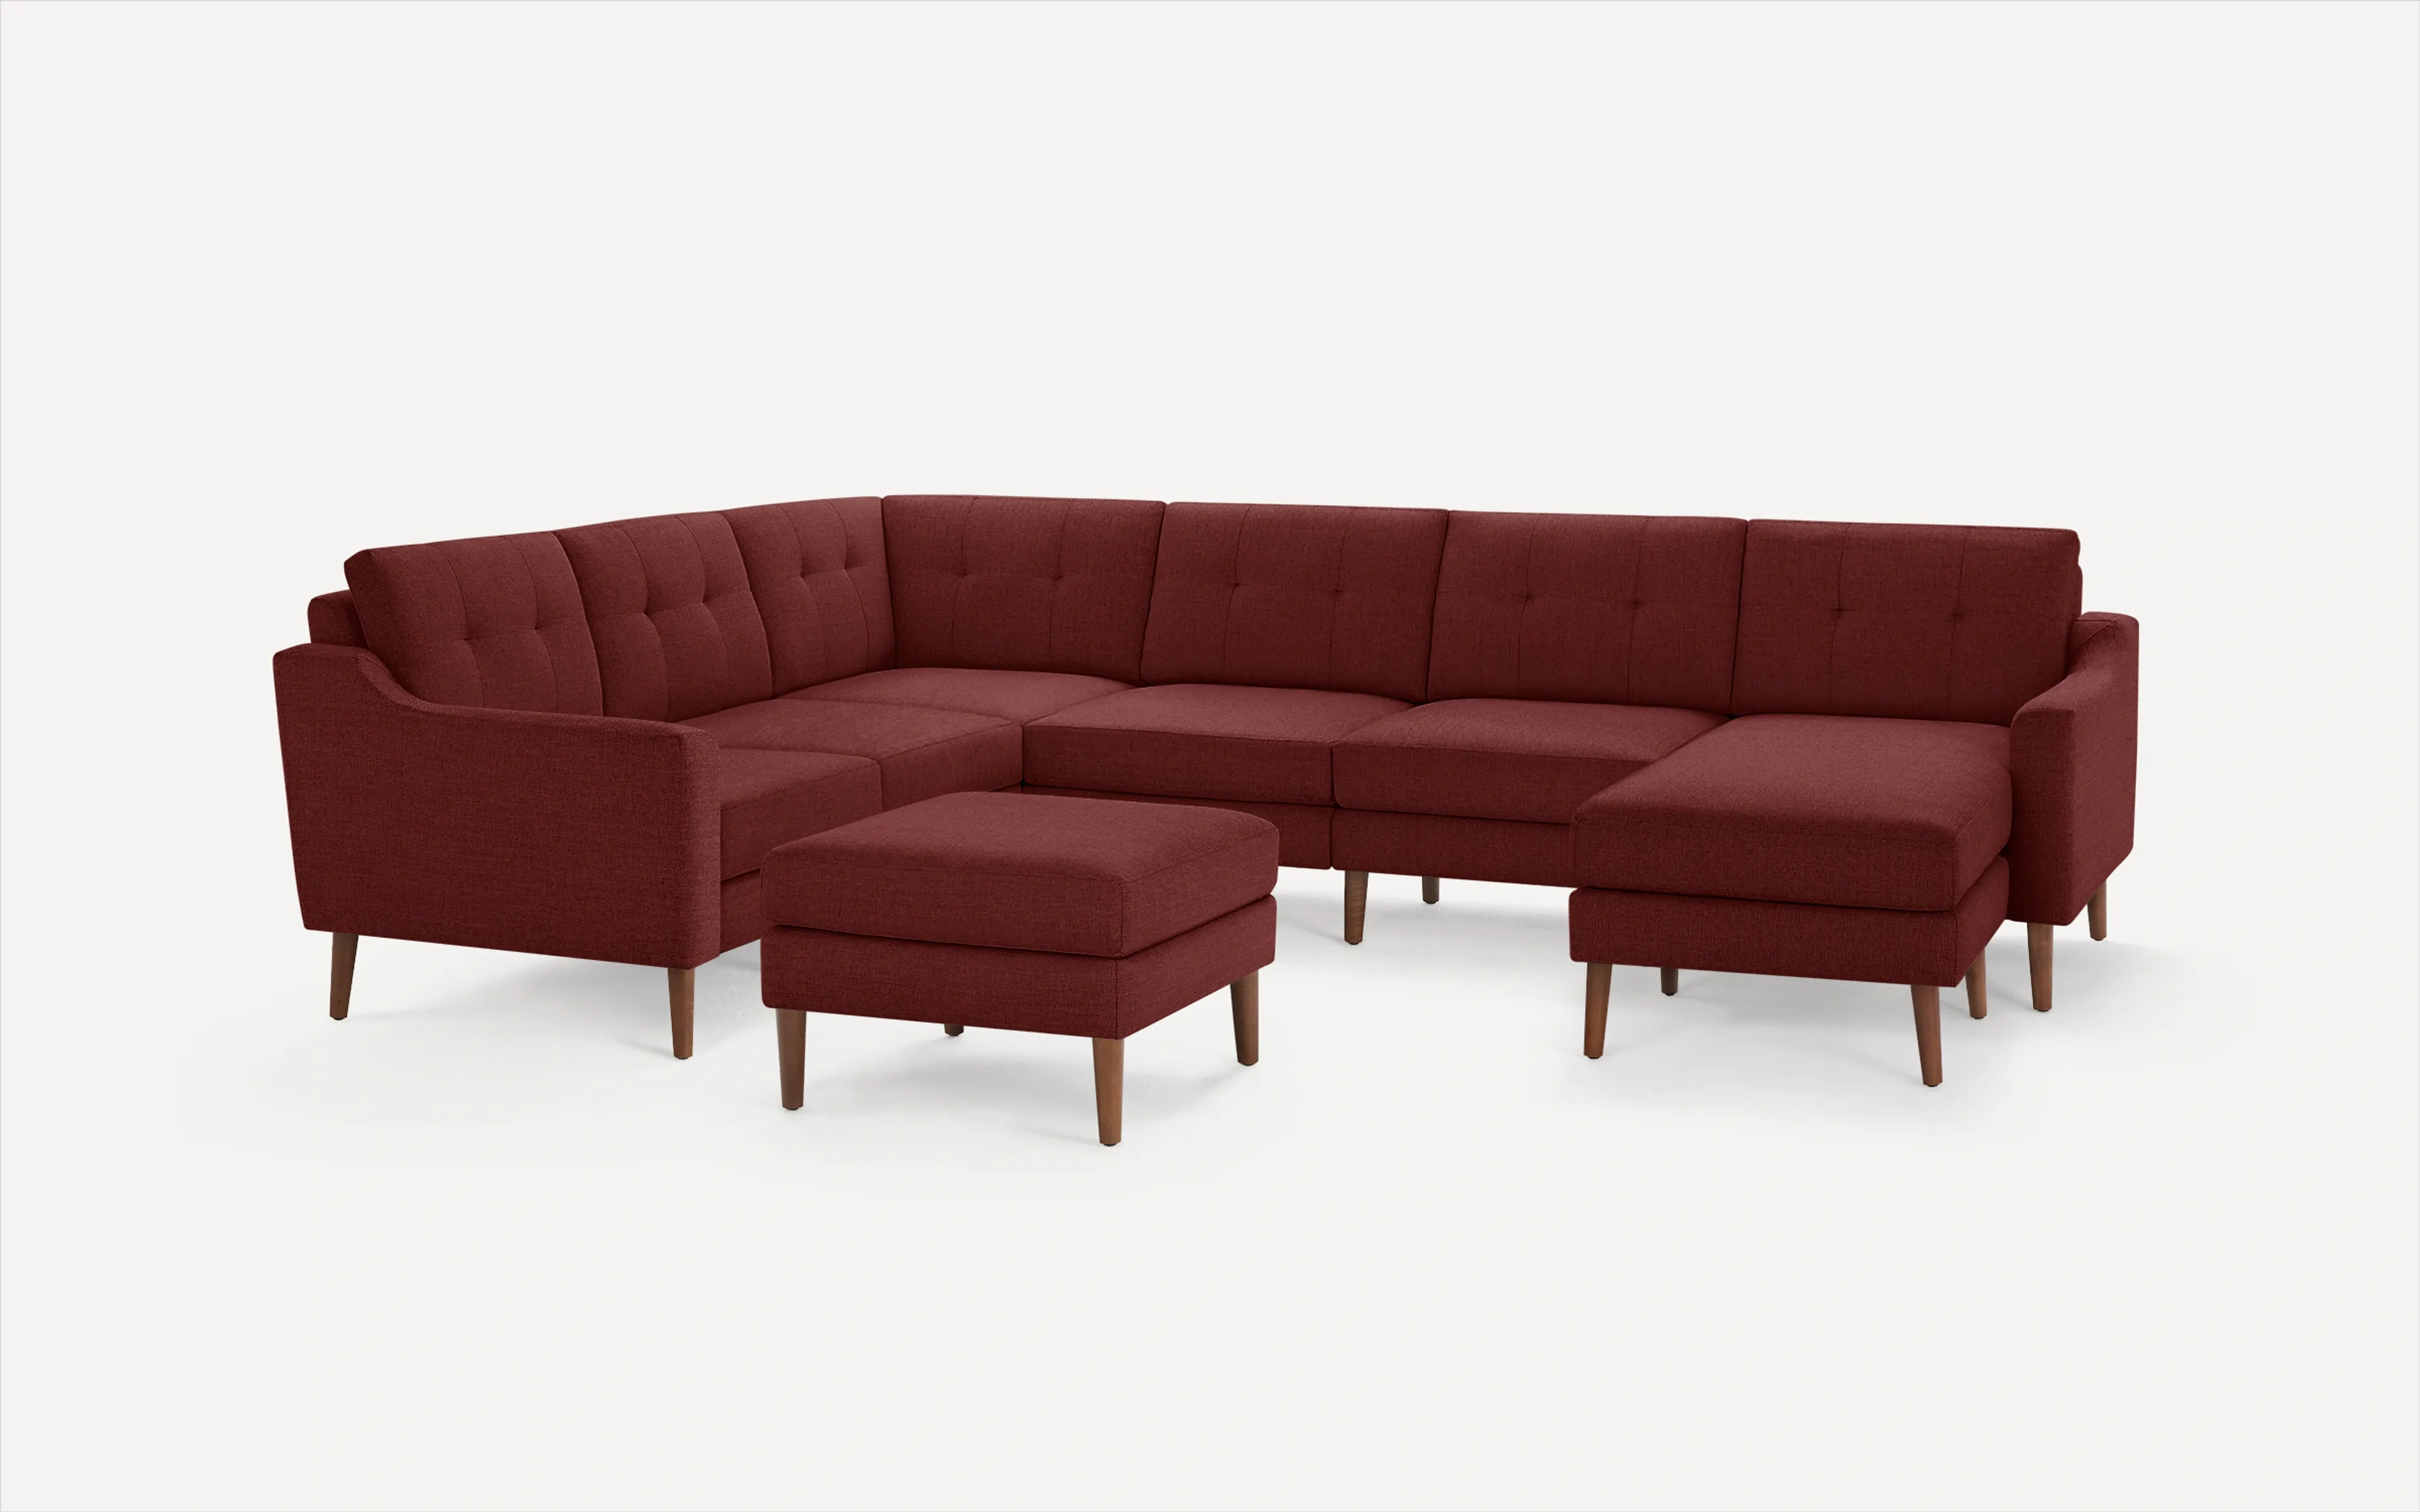 Slope Nomad 6-Seat Corner Sectional with Chaise and Ottoman